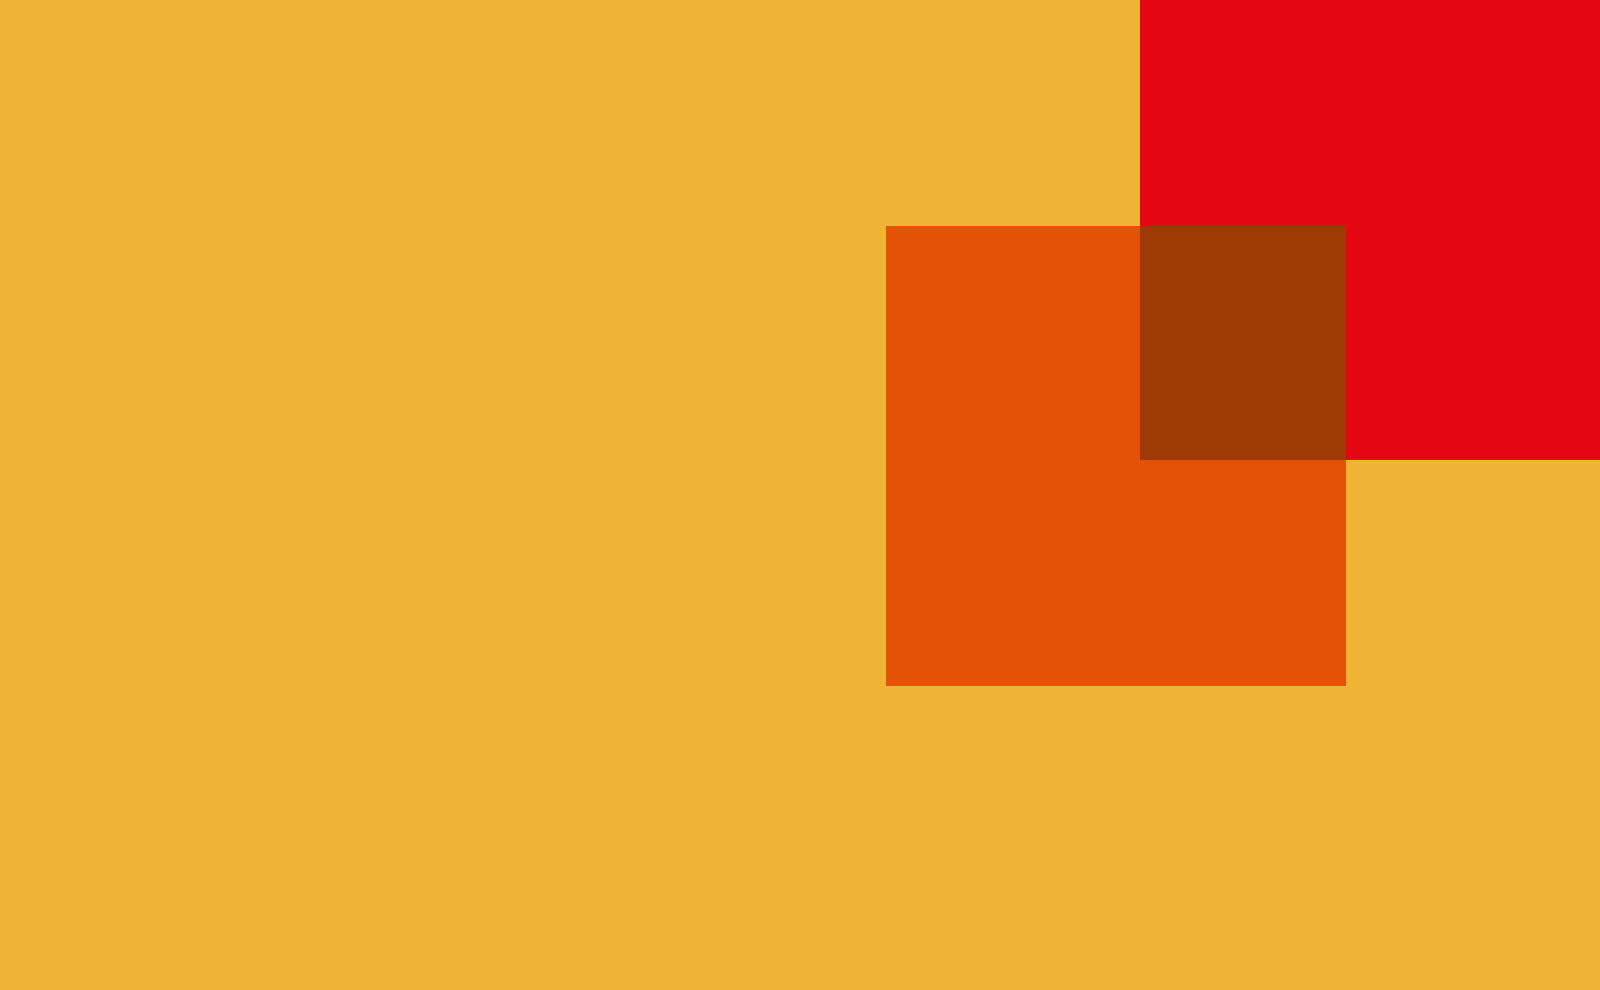 Decorative orange and red square on a yellow background